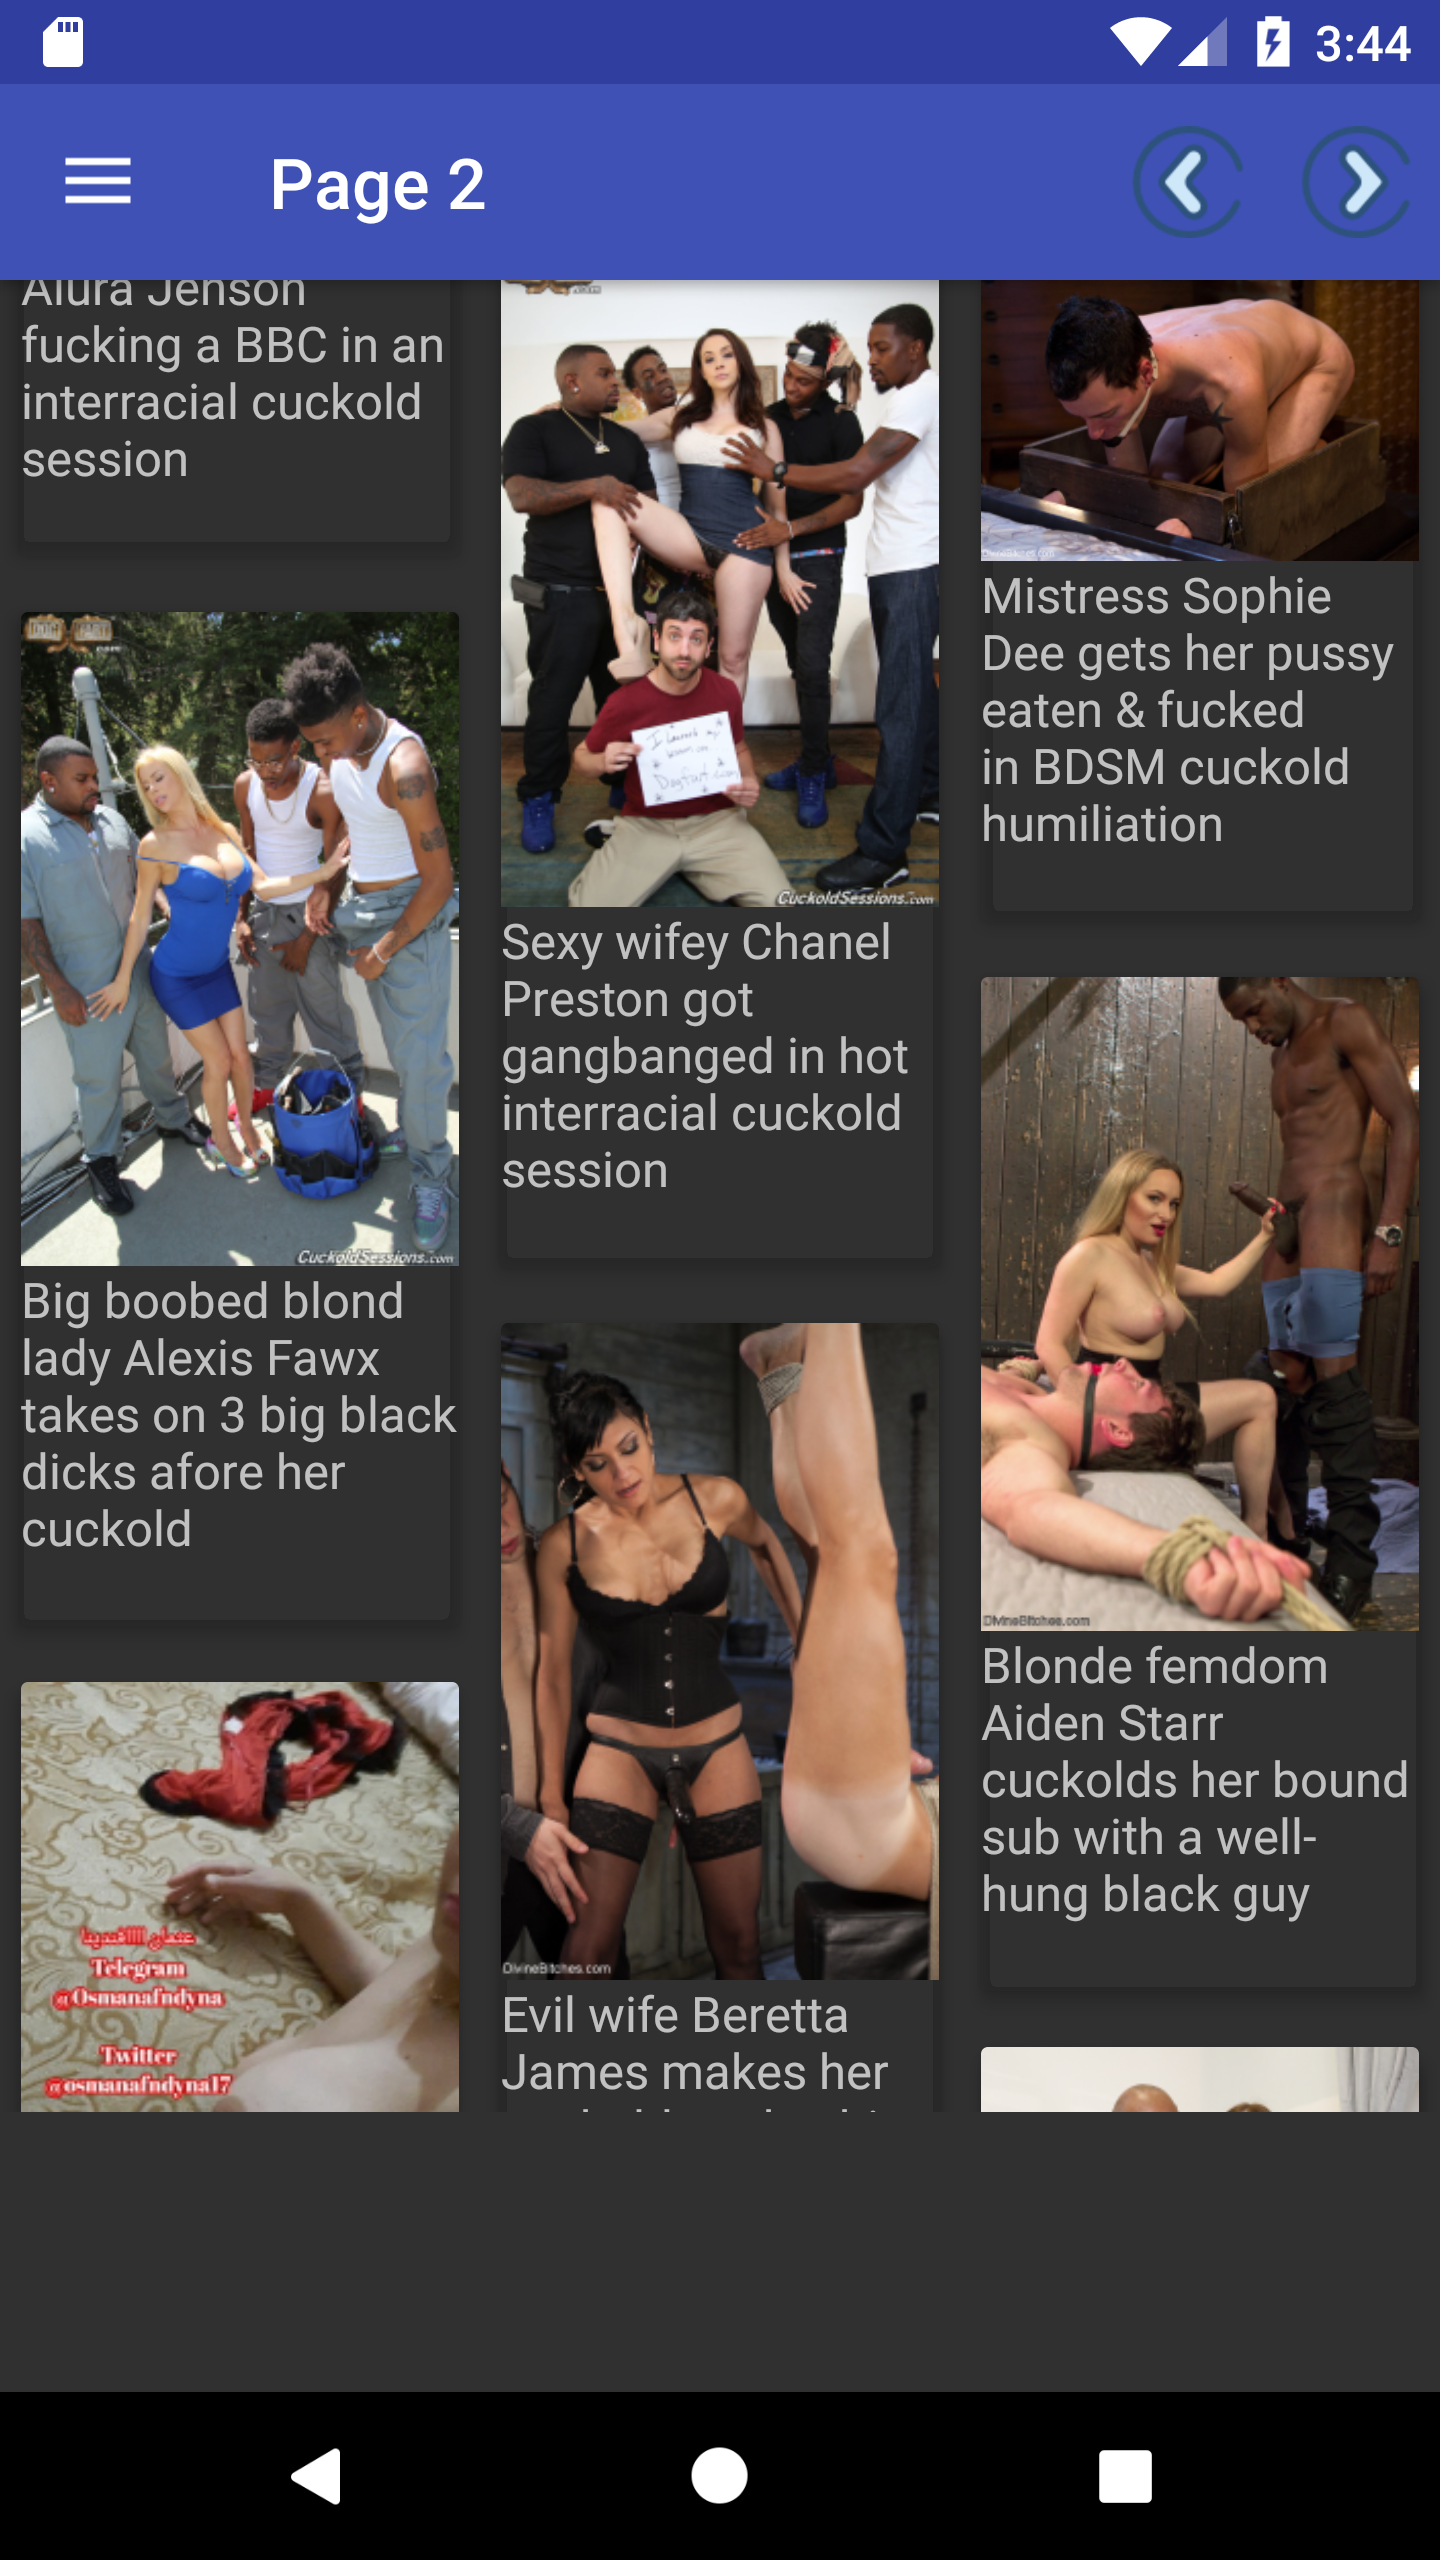 Cuckold Porn image,hot,pics,sexy,pornstars,adams,galleries,panties,apps,picw,images,download,pic,porn,henti,adult,and,free,stacy,app,puzzle,hentai,sex